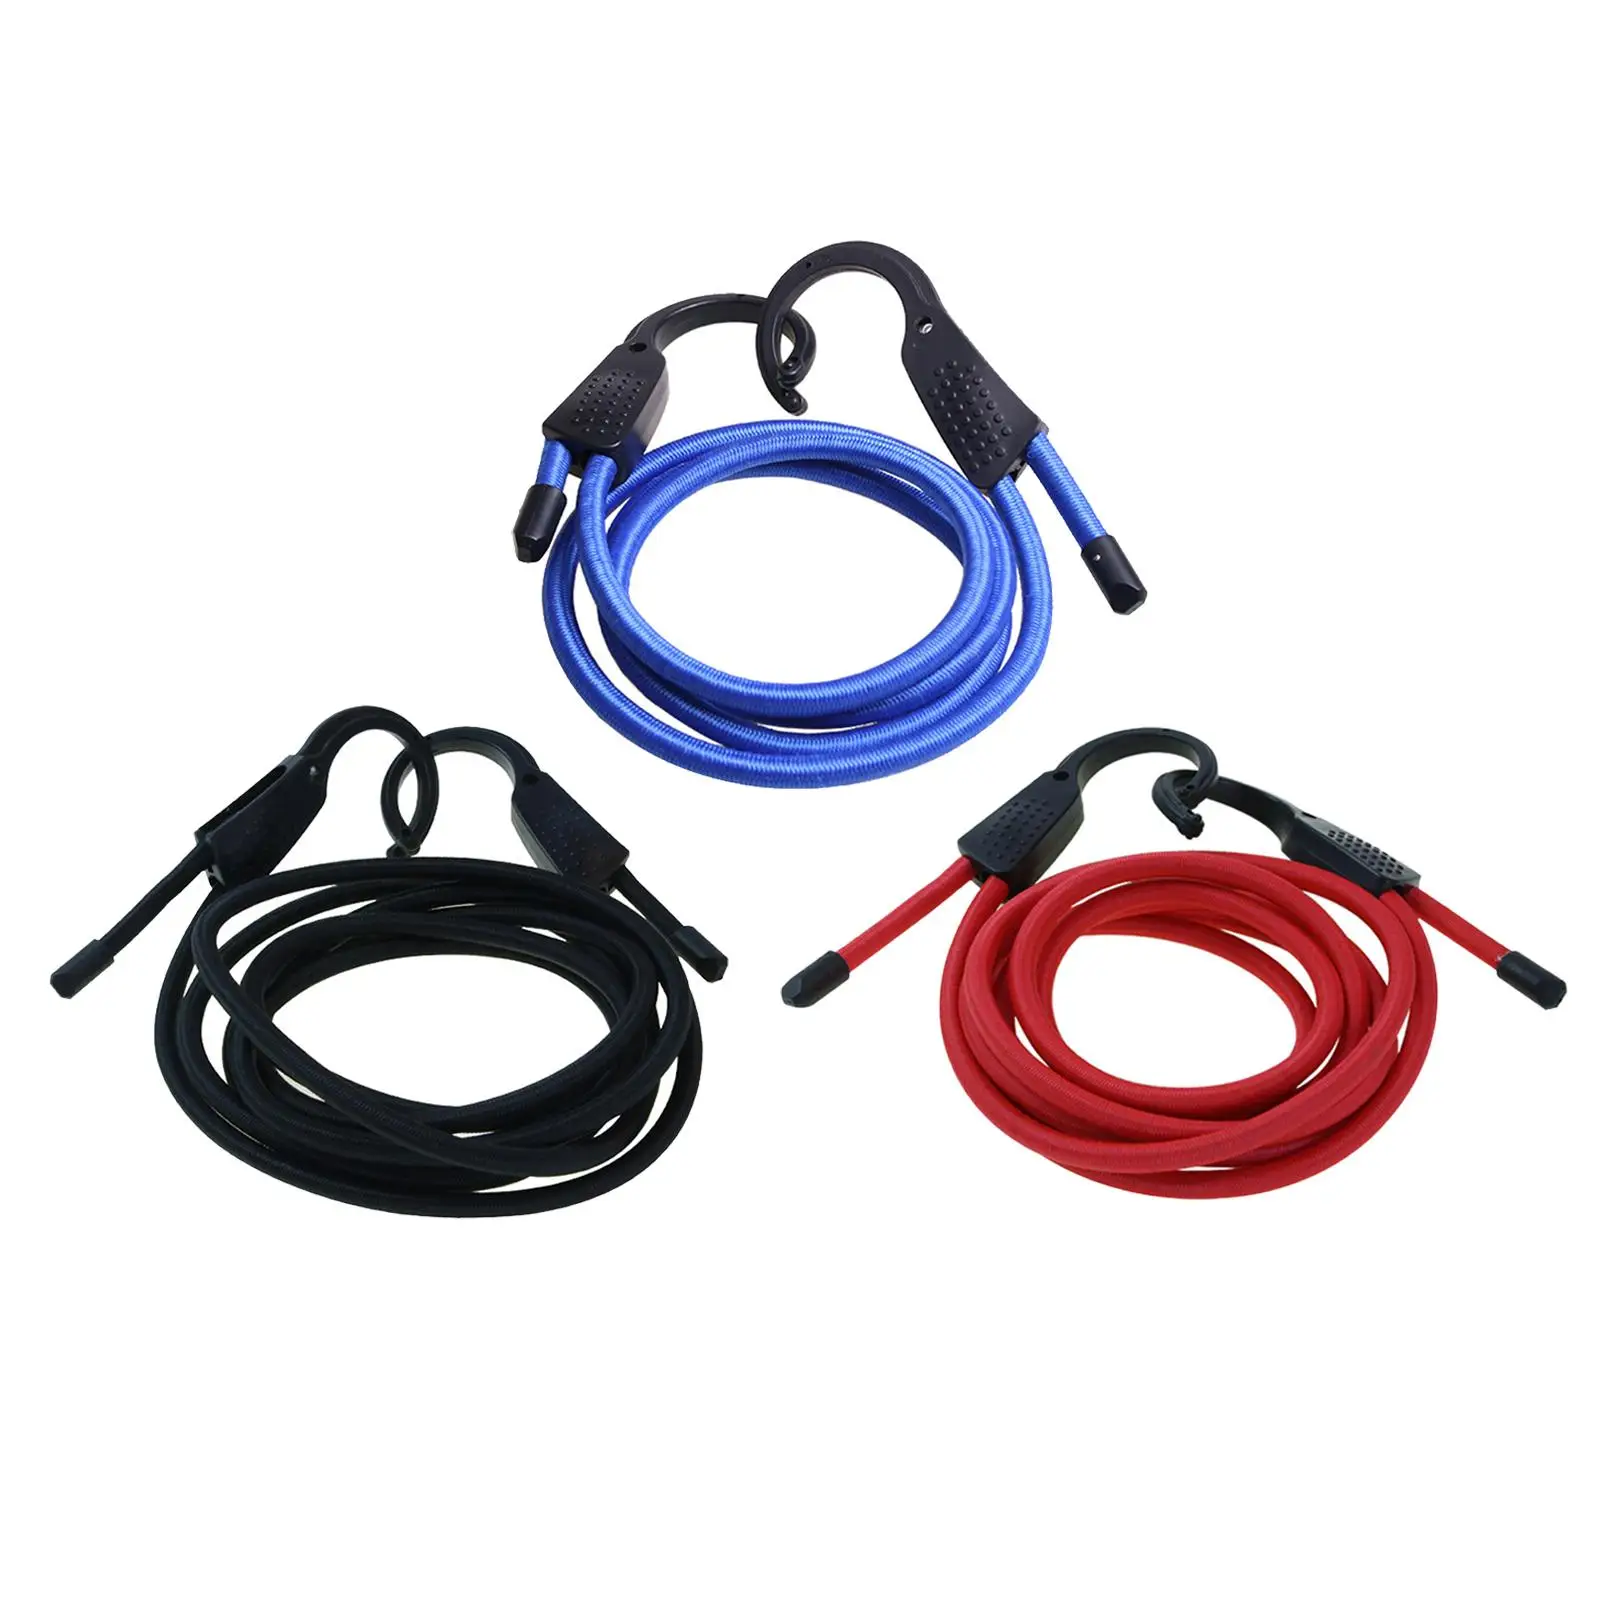 Rubber Elastic Strap Heavy Duty Cargo Luggage Lashing Buckle Rope Car Clothesline Hook Cargo Straps for Camping Motorcycle